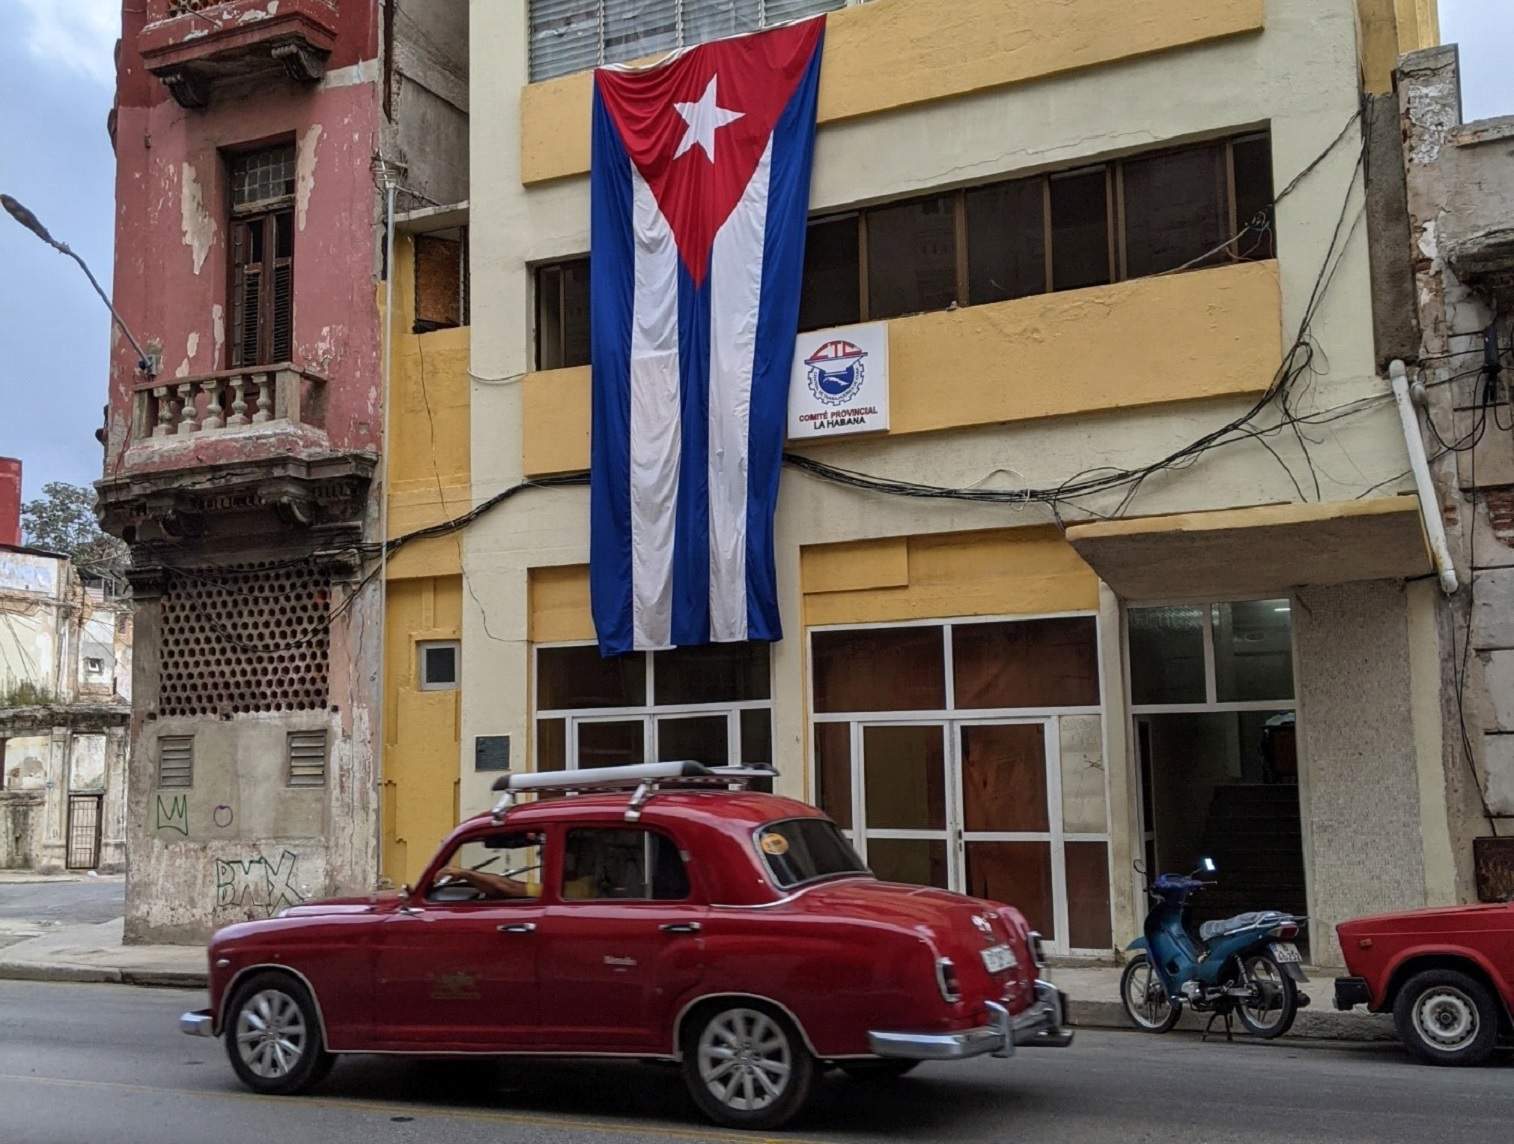 Red classic car in front of building adorned with Cuban flag